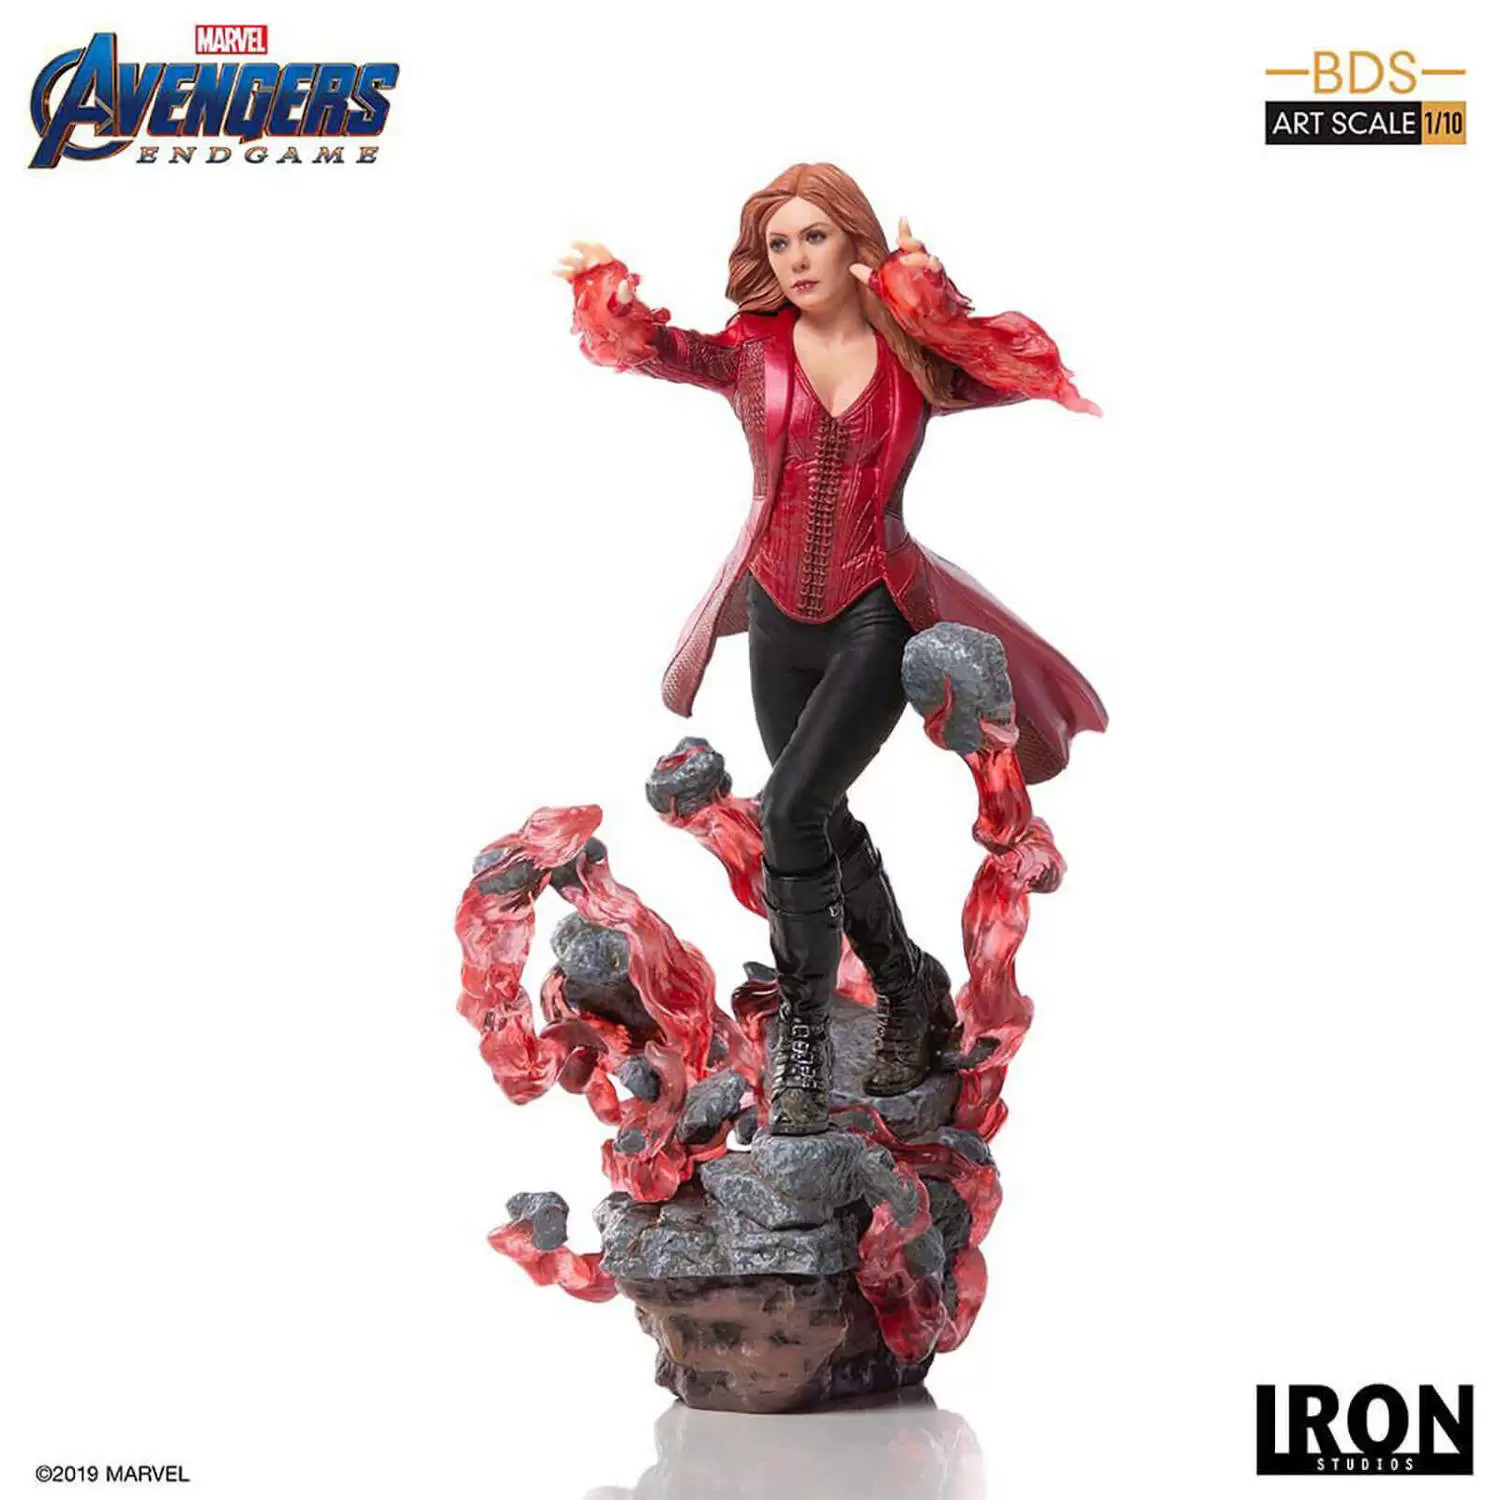 Iron Studios - Avengers: Endgame - Scarlet Witch - BDS Art Scale 